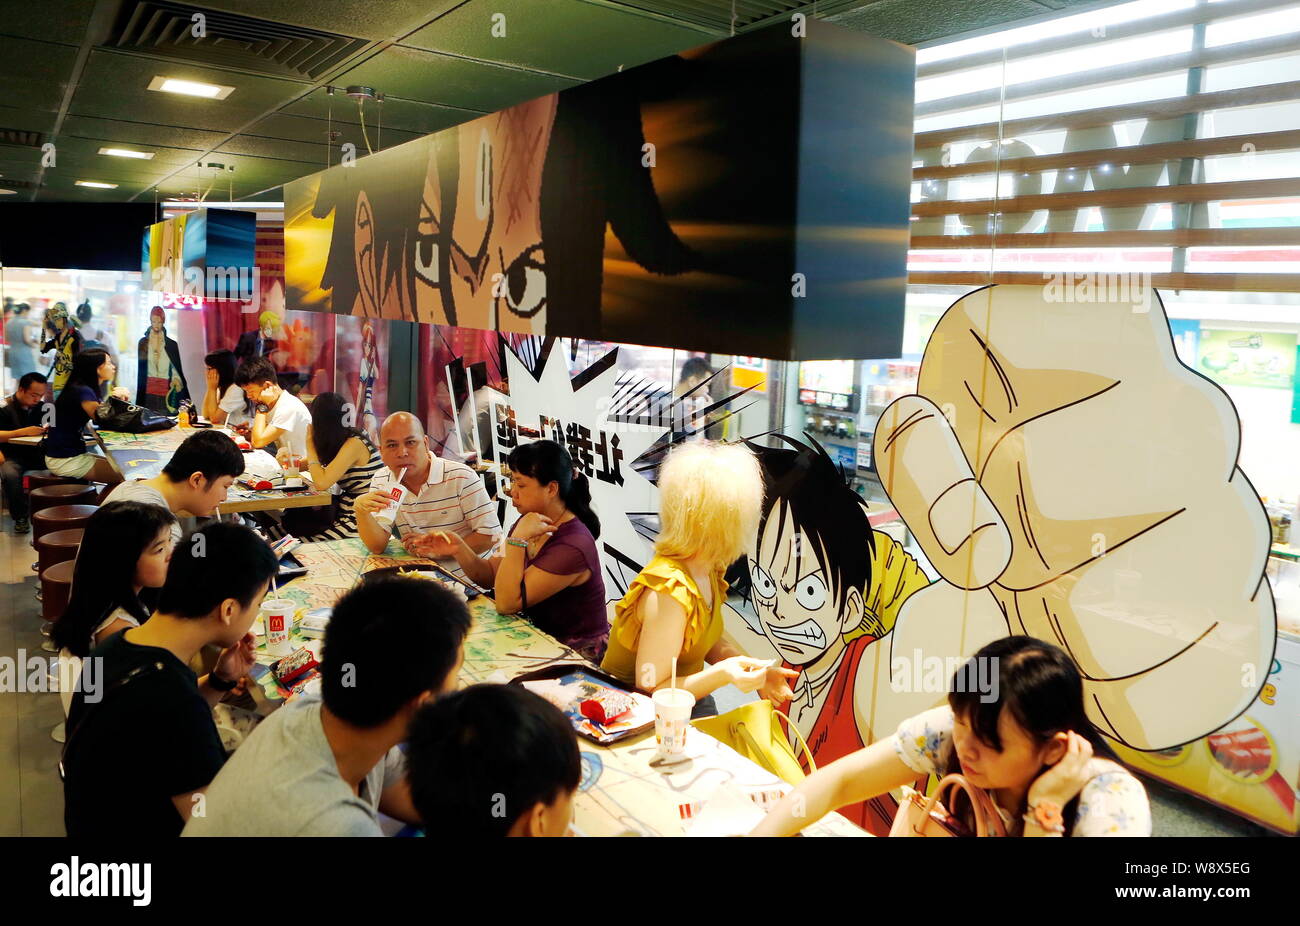 Customers Eat At The One Piece Themed Mcdonalds Fastfood Restaurant In Guangzhou City South Chinas Guangdong Province 18 July 14 A Mcdonalds Fa Stock Photo Alamy